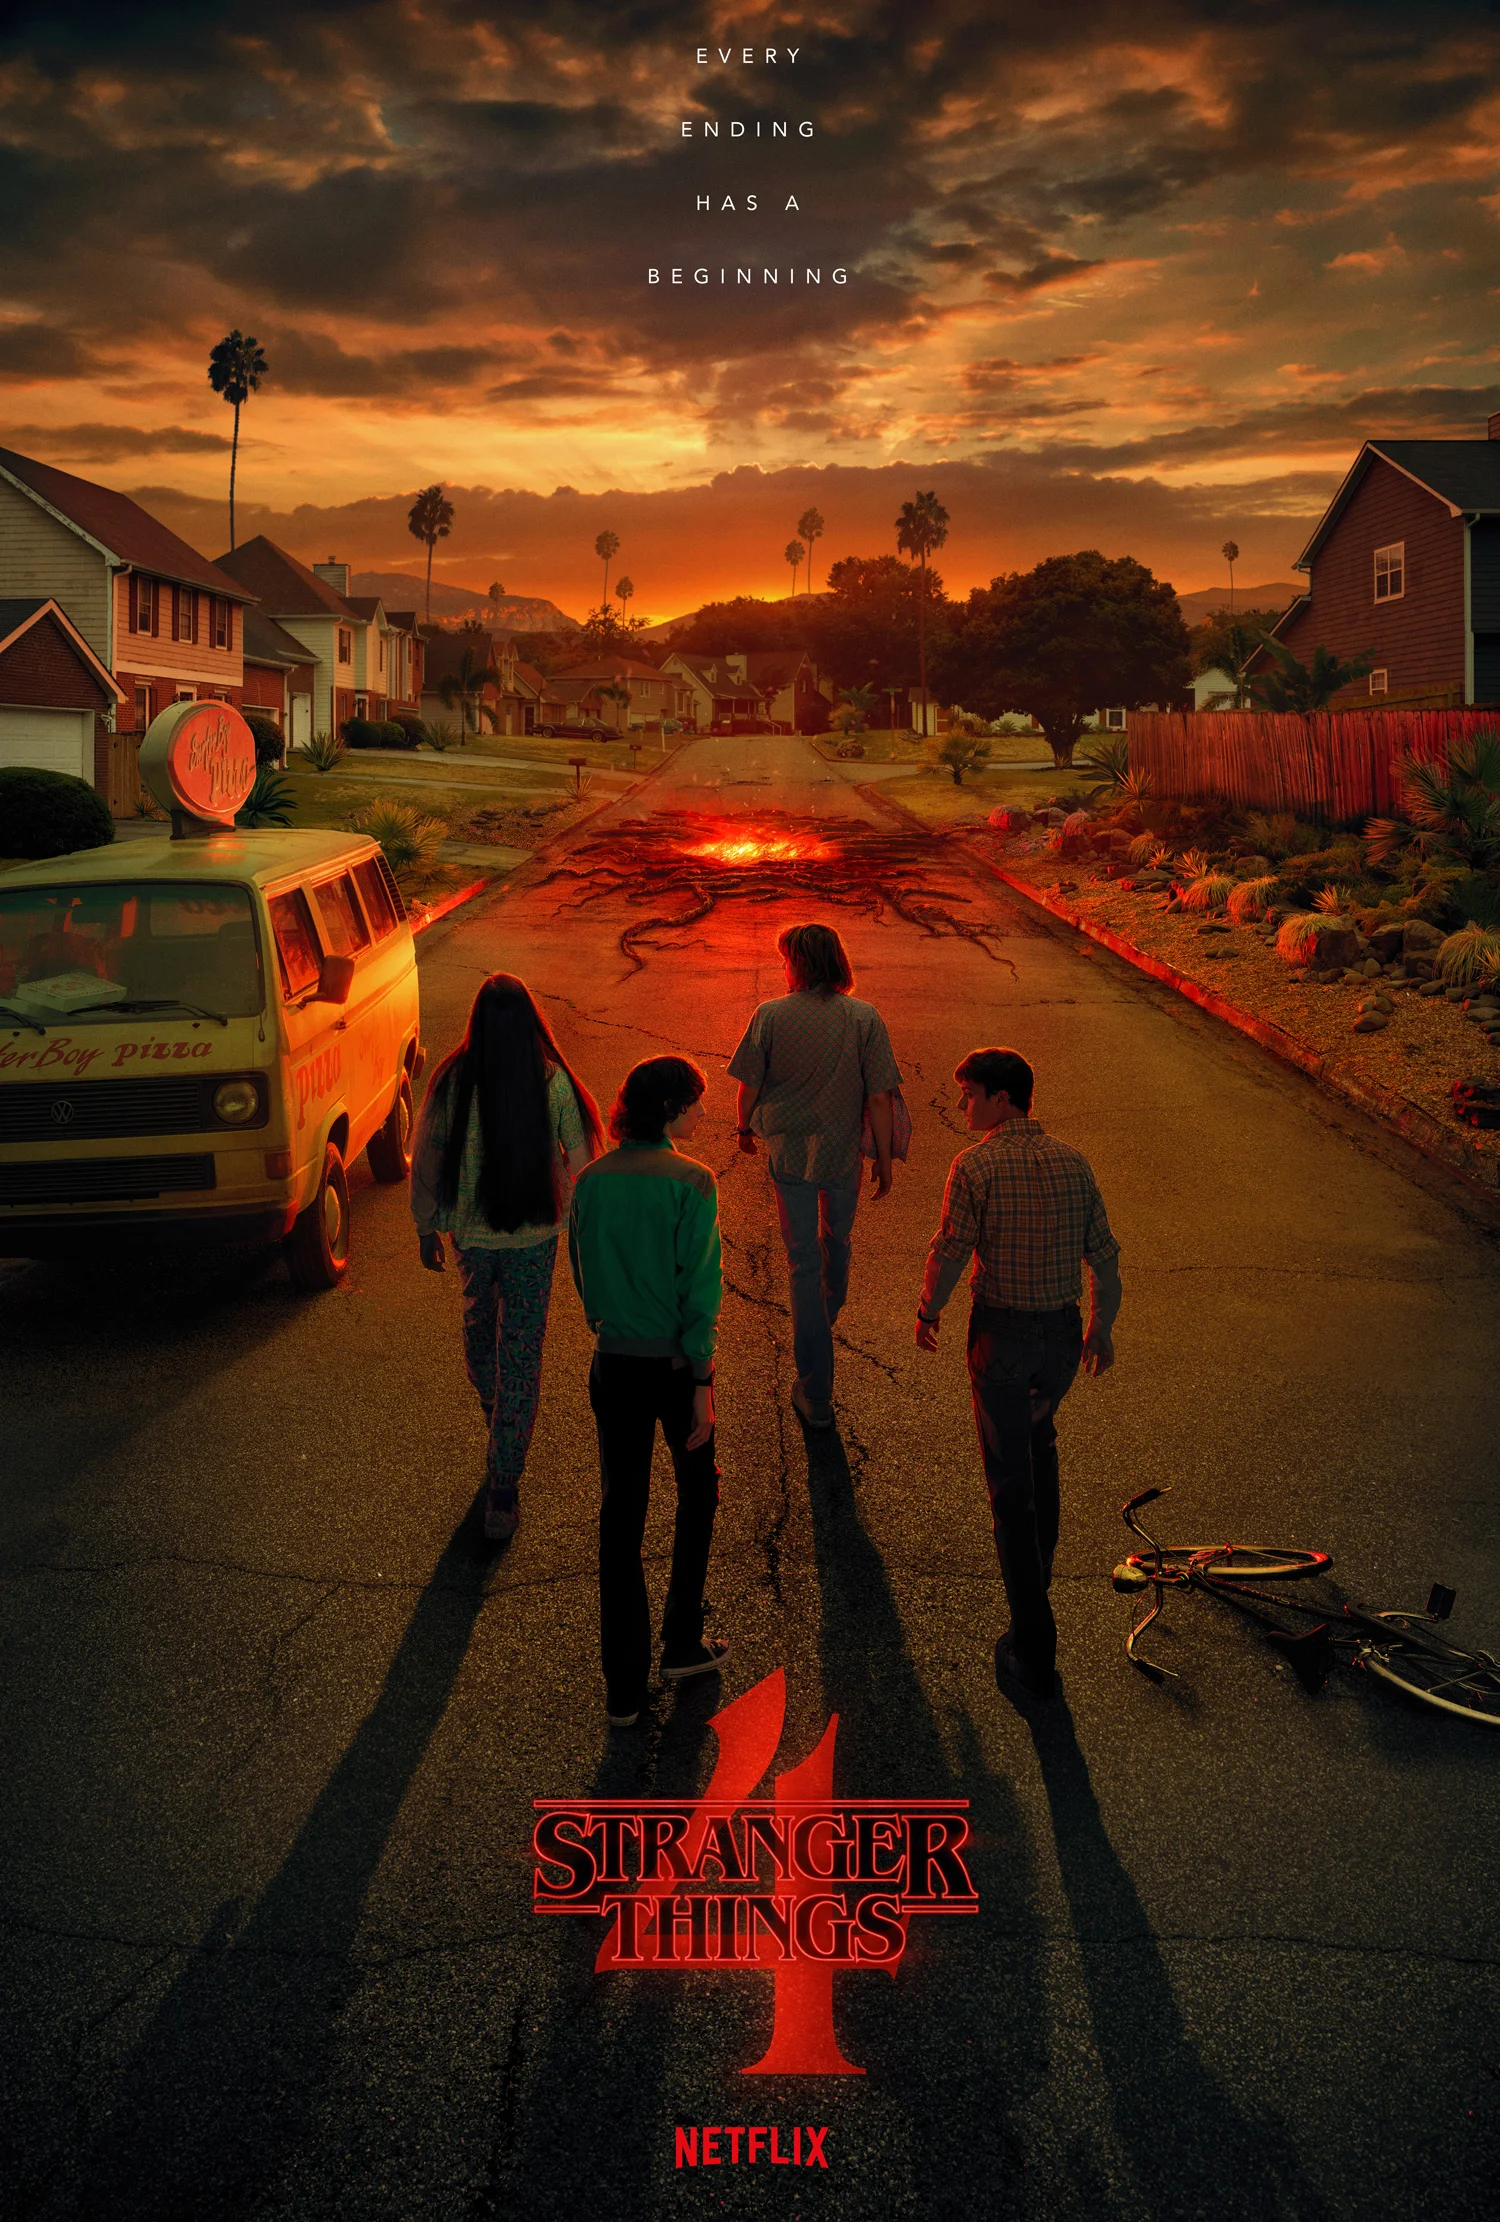 the-hit-drama-stranger-things-season-4-will-go-live-on-may-27-and-the-renewed-fifth-season-will-be-the-final-season-3